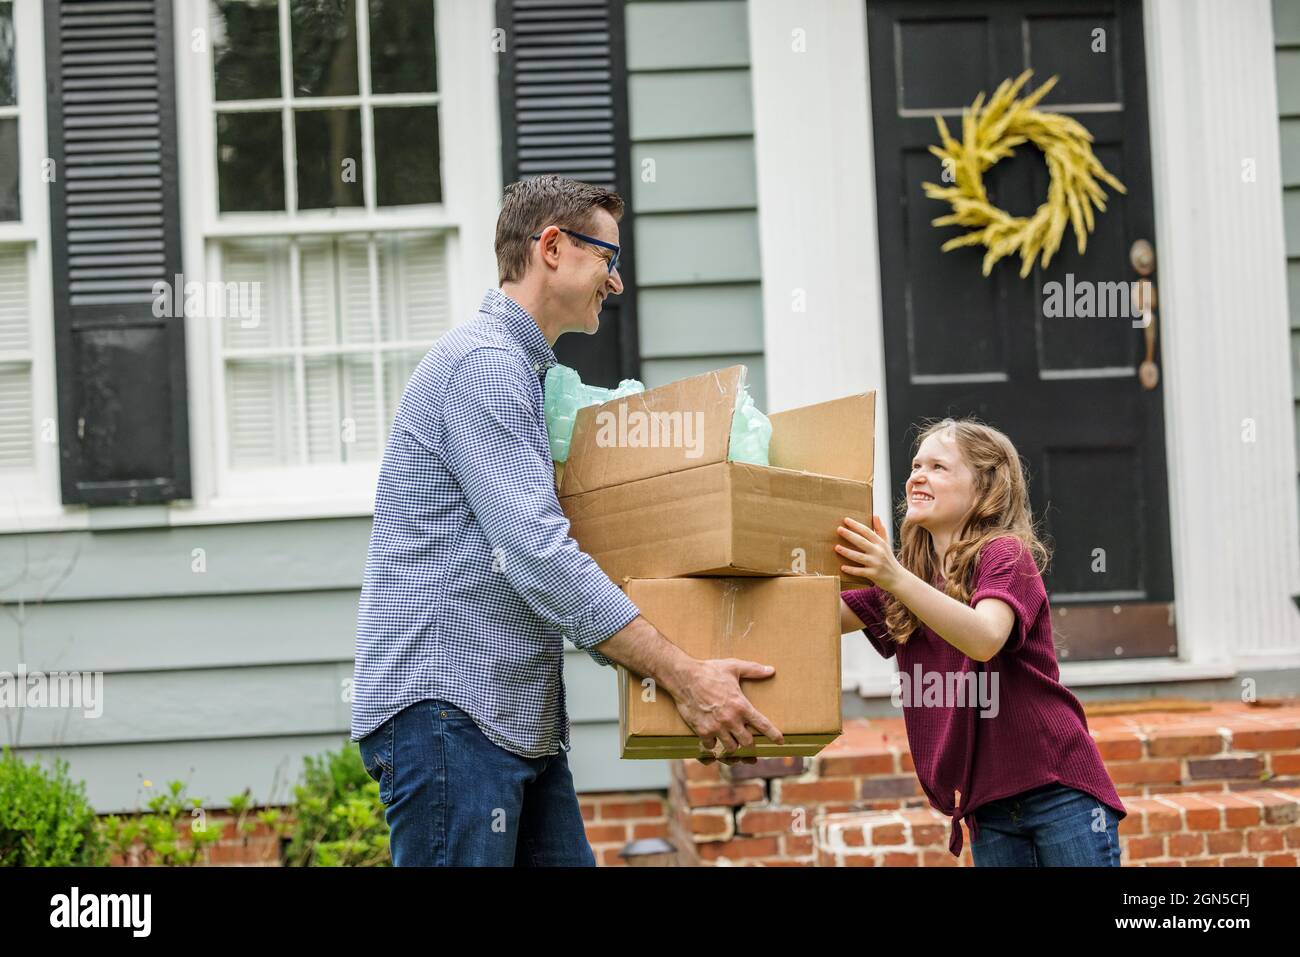 A father and daughter holding moving boxes outside a small blue cottage house getting ready for a move Stock Photo